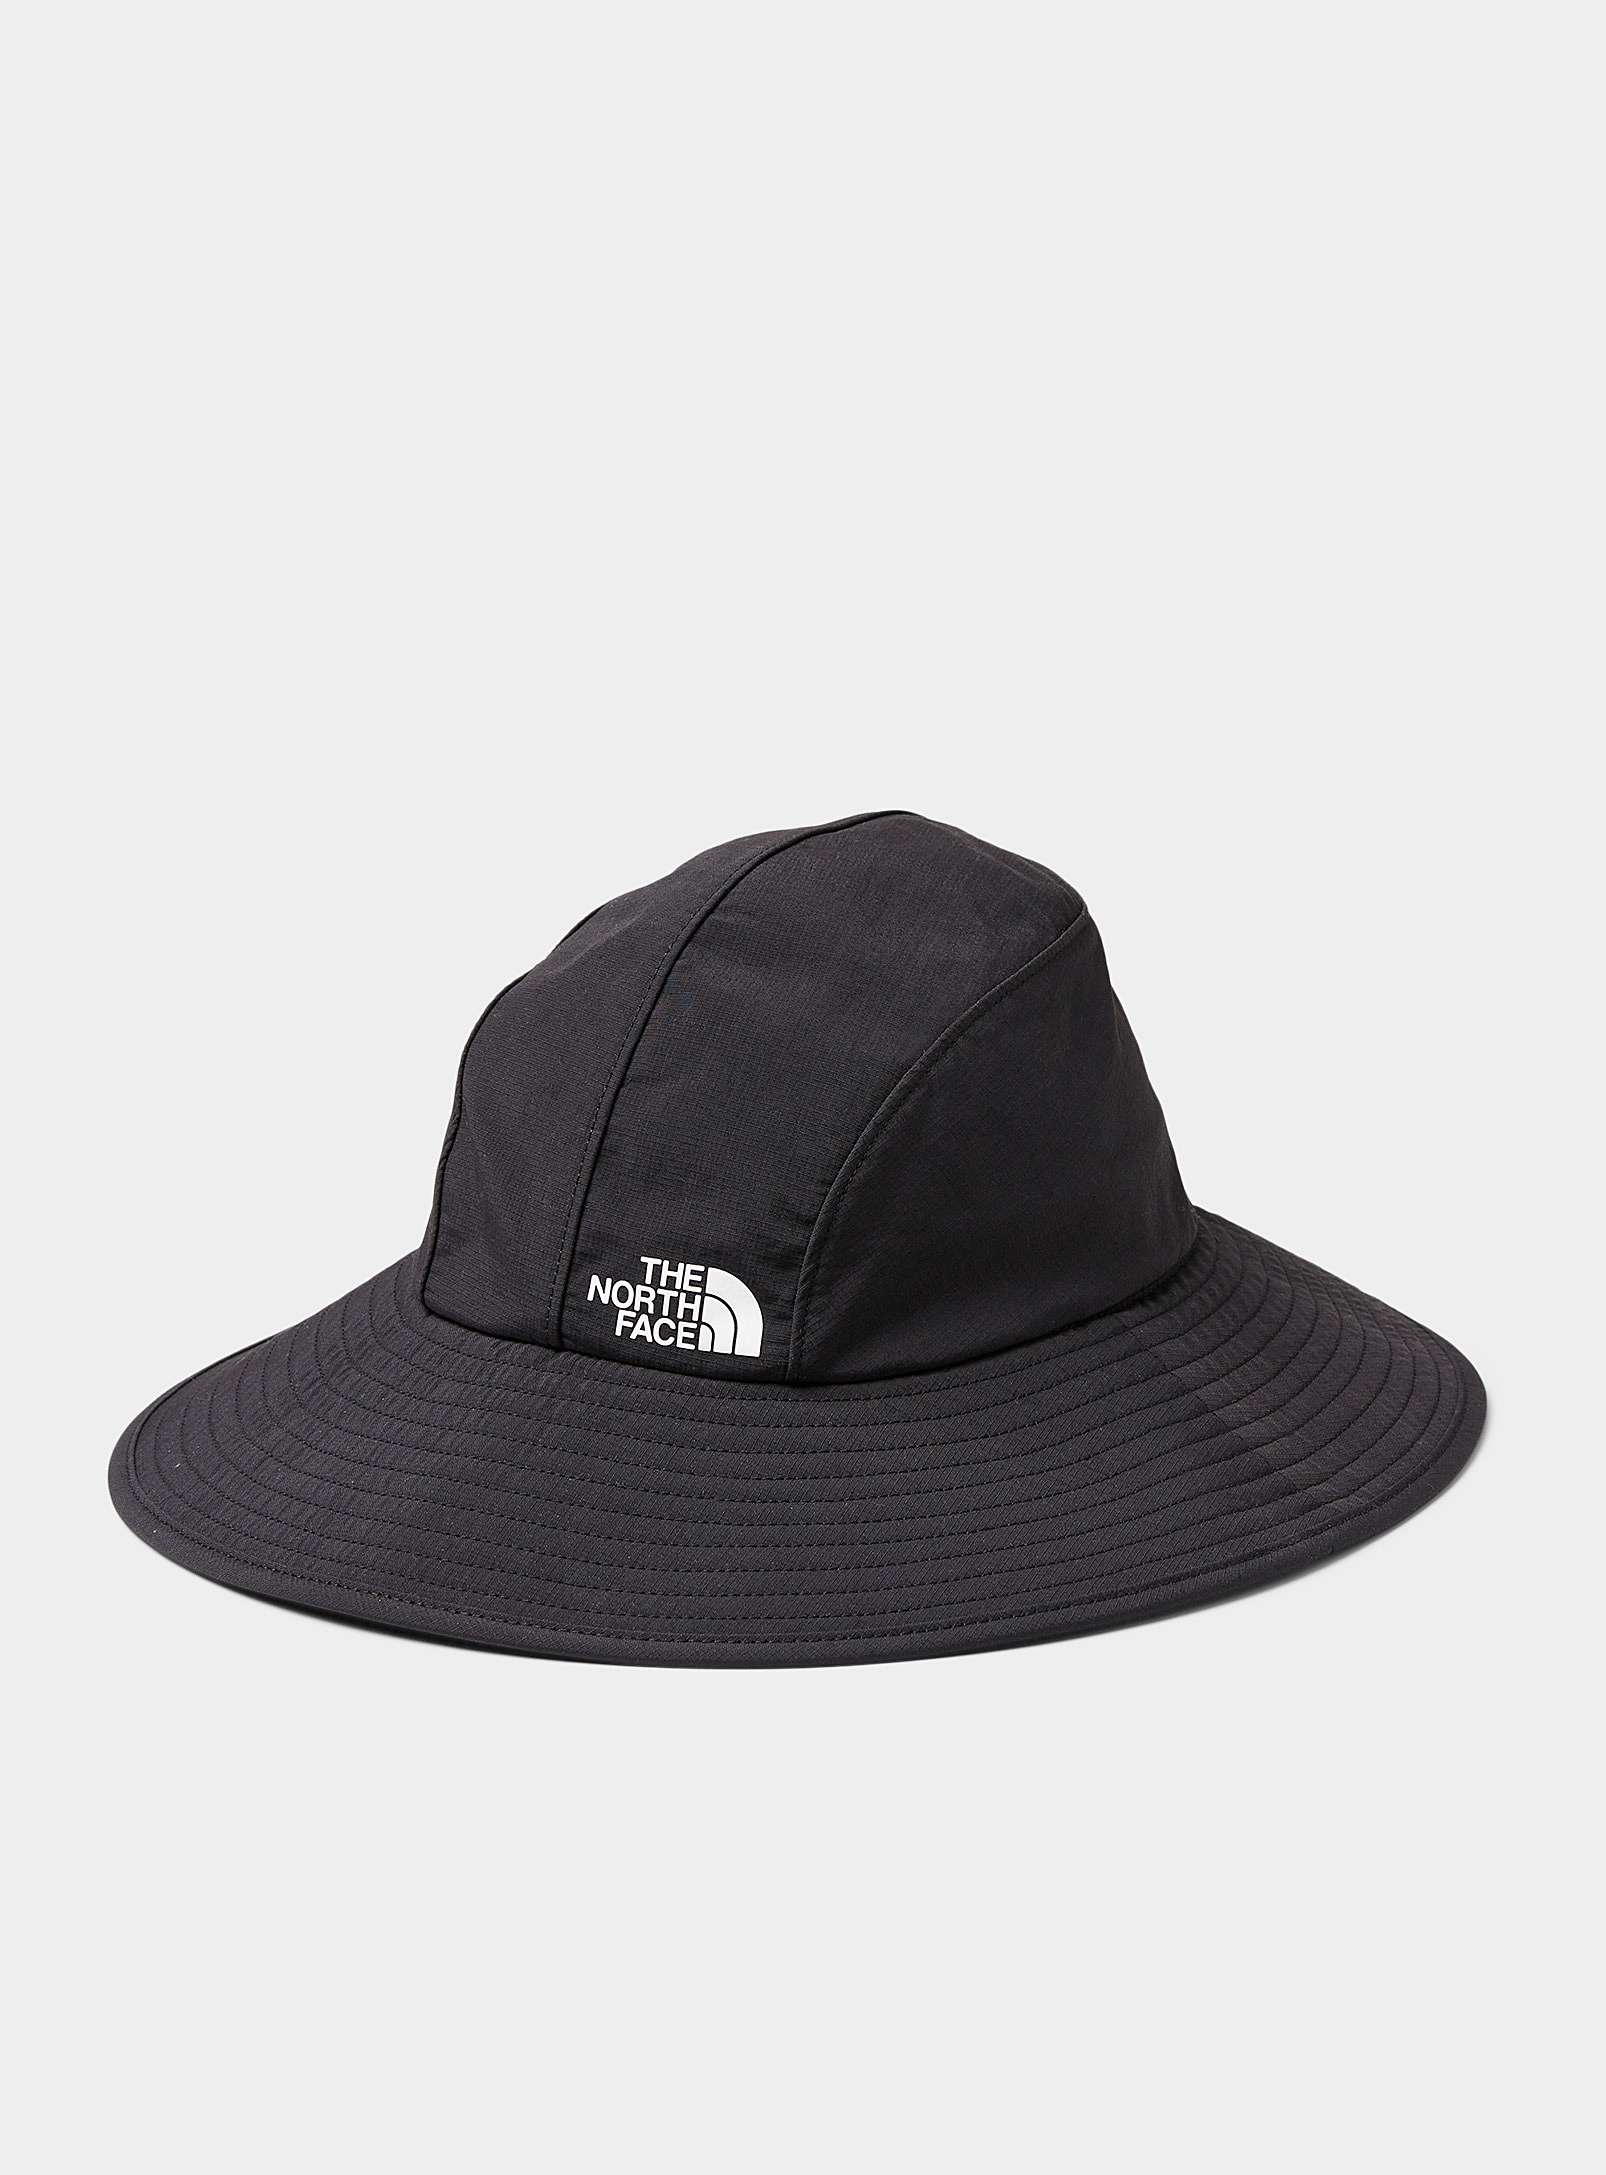 The North Face Lightweight Canvas Fisherman Hat In Black